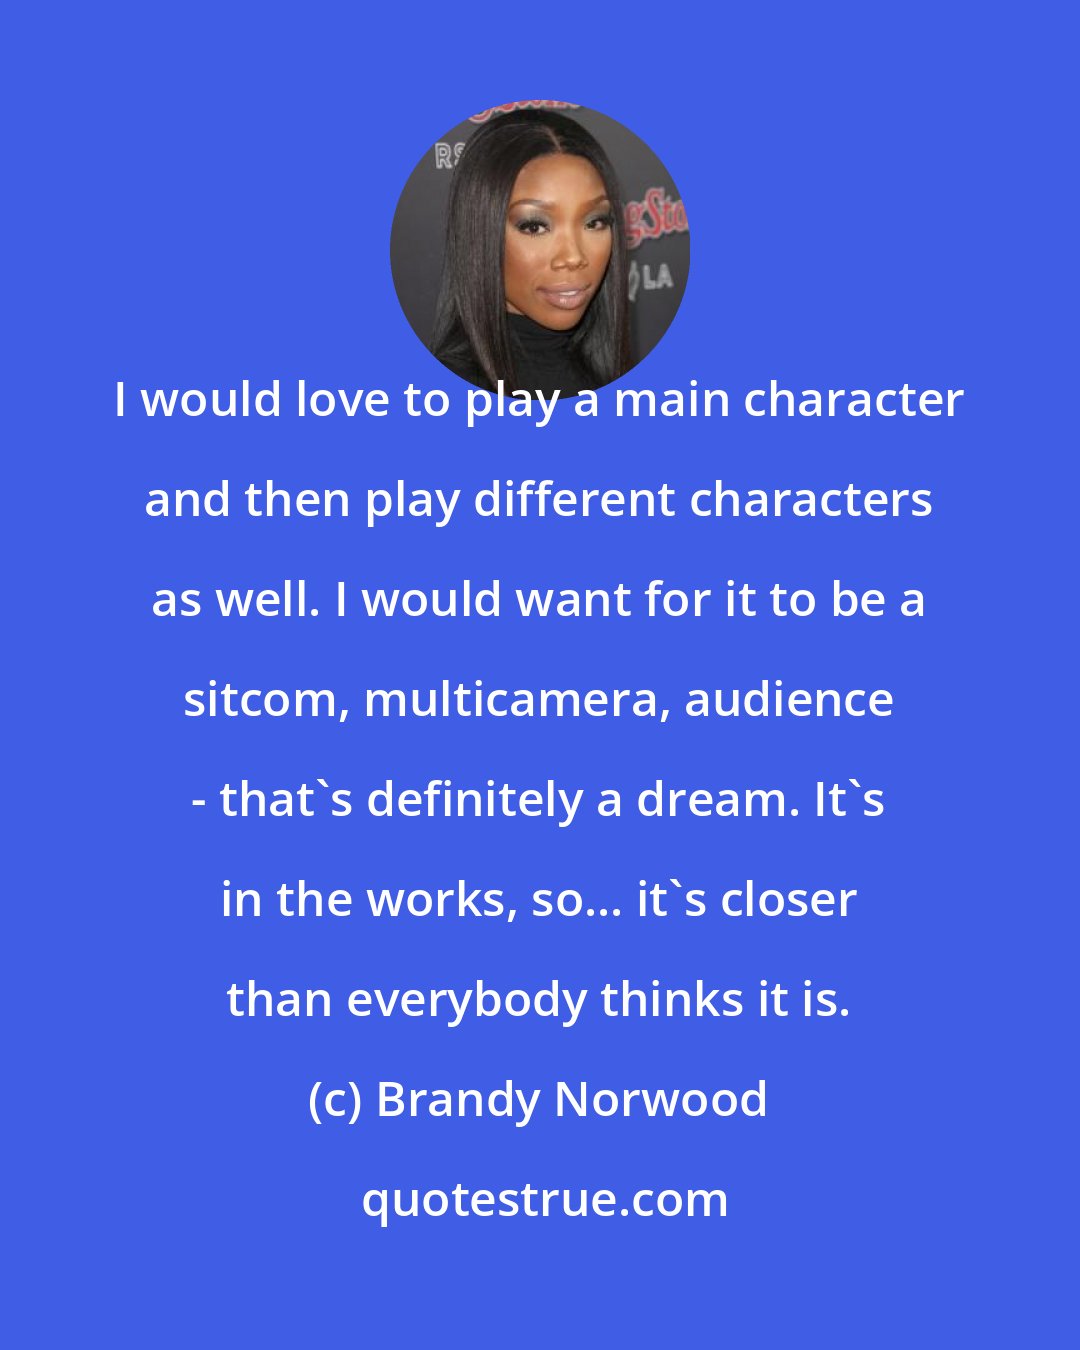 Brandy Norwood: I would love to play a main character and then play different characters as well. I would want for it to be a sitcom, multicamera, audience - that's definitely a dream. It's in the works, so... it's closer than everybody thinks it is.